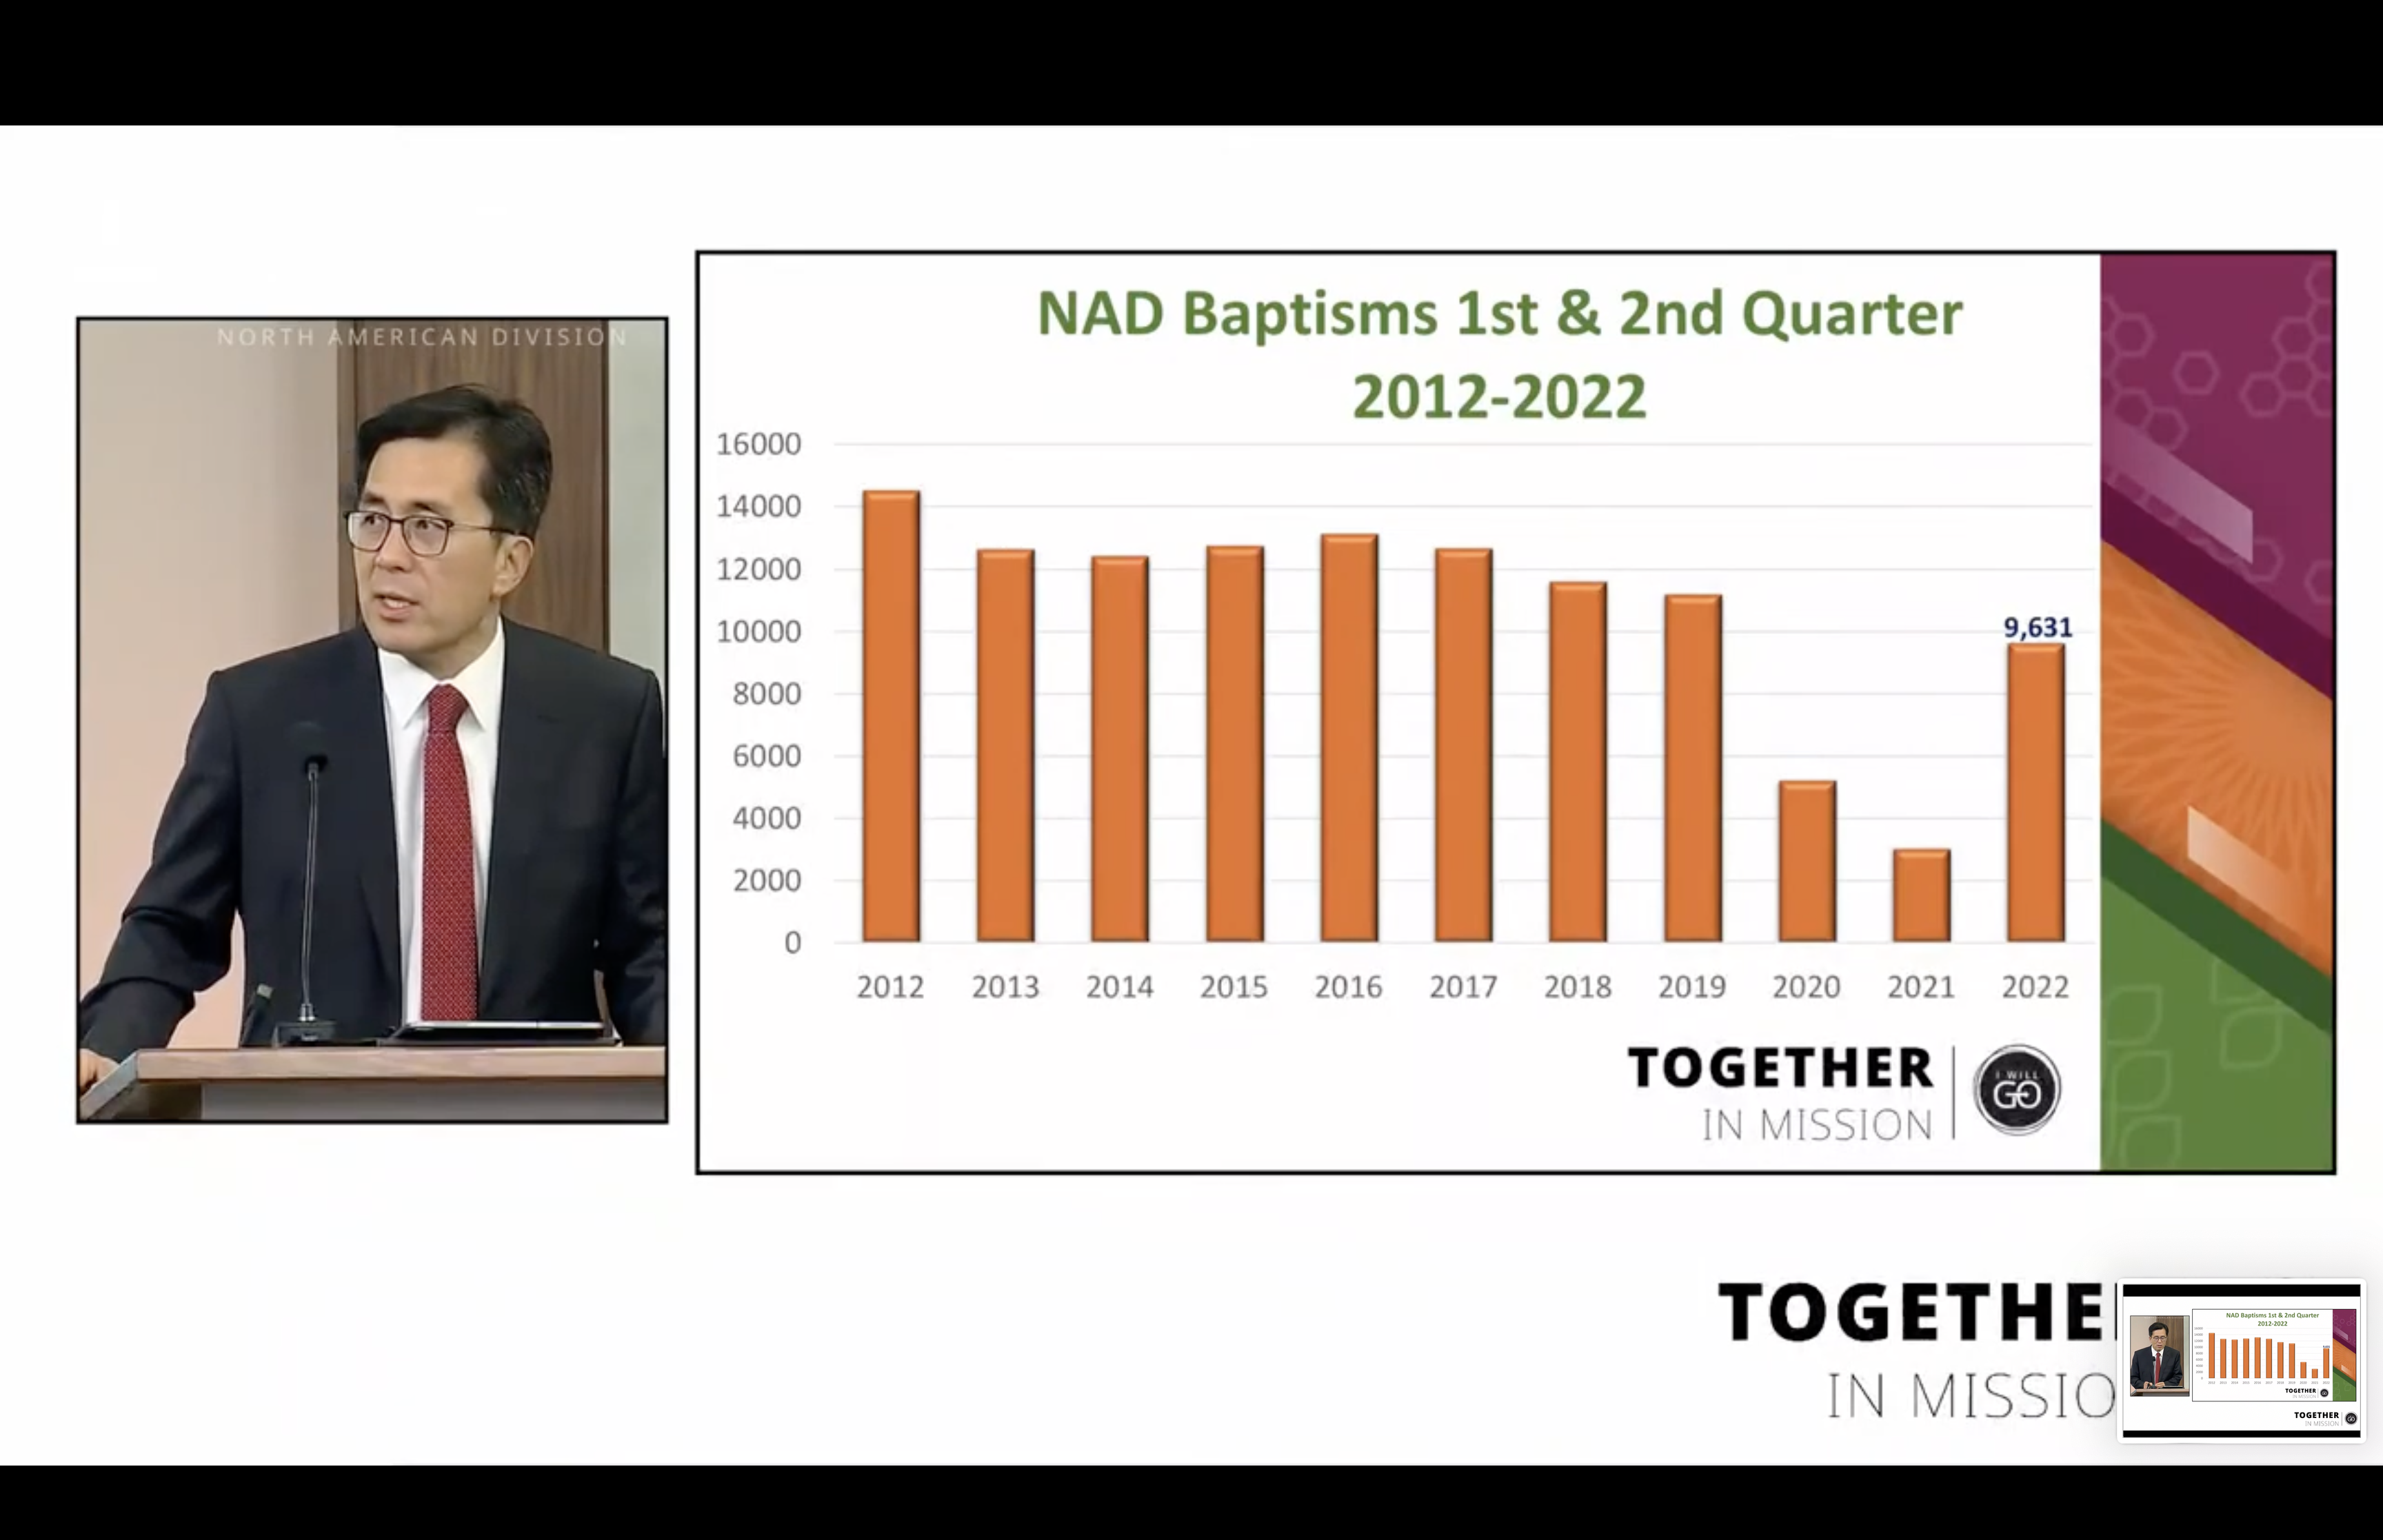 Slide from the secretary's report at the 2022 NAD Year-End Meeting